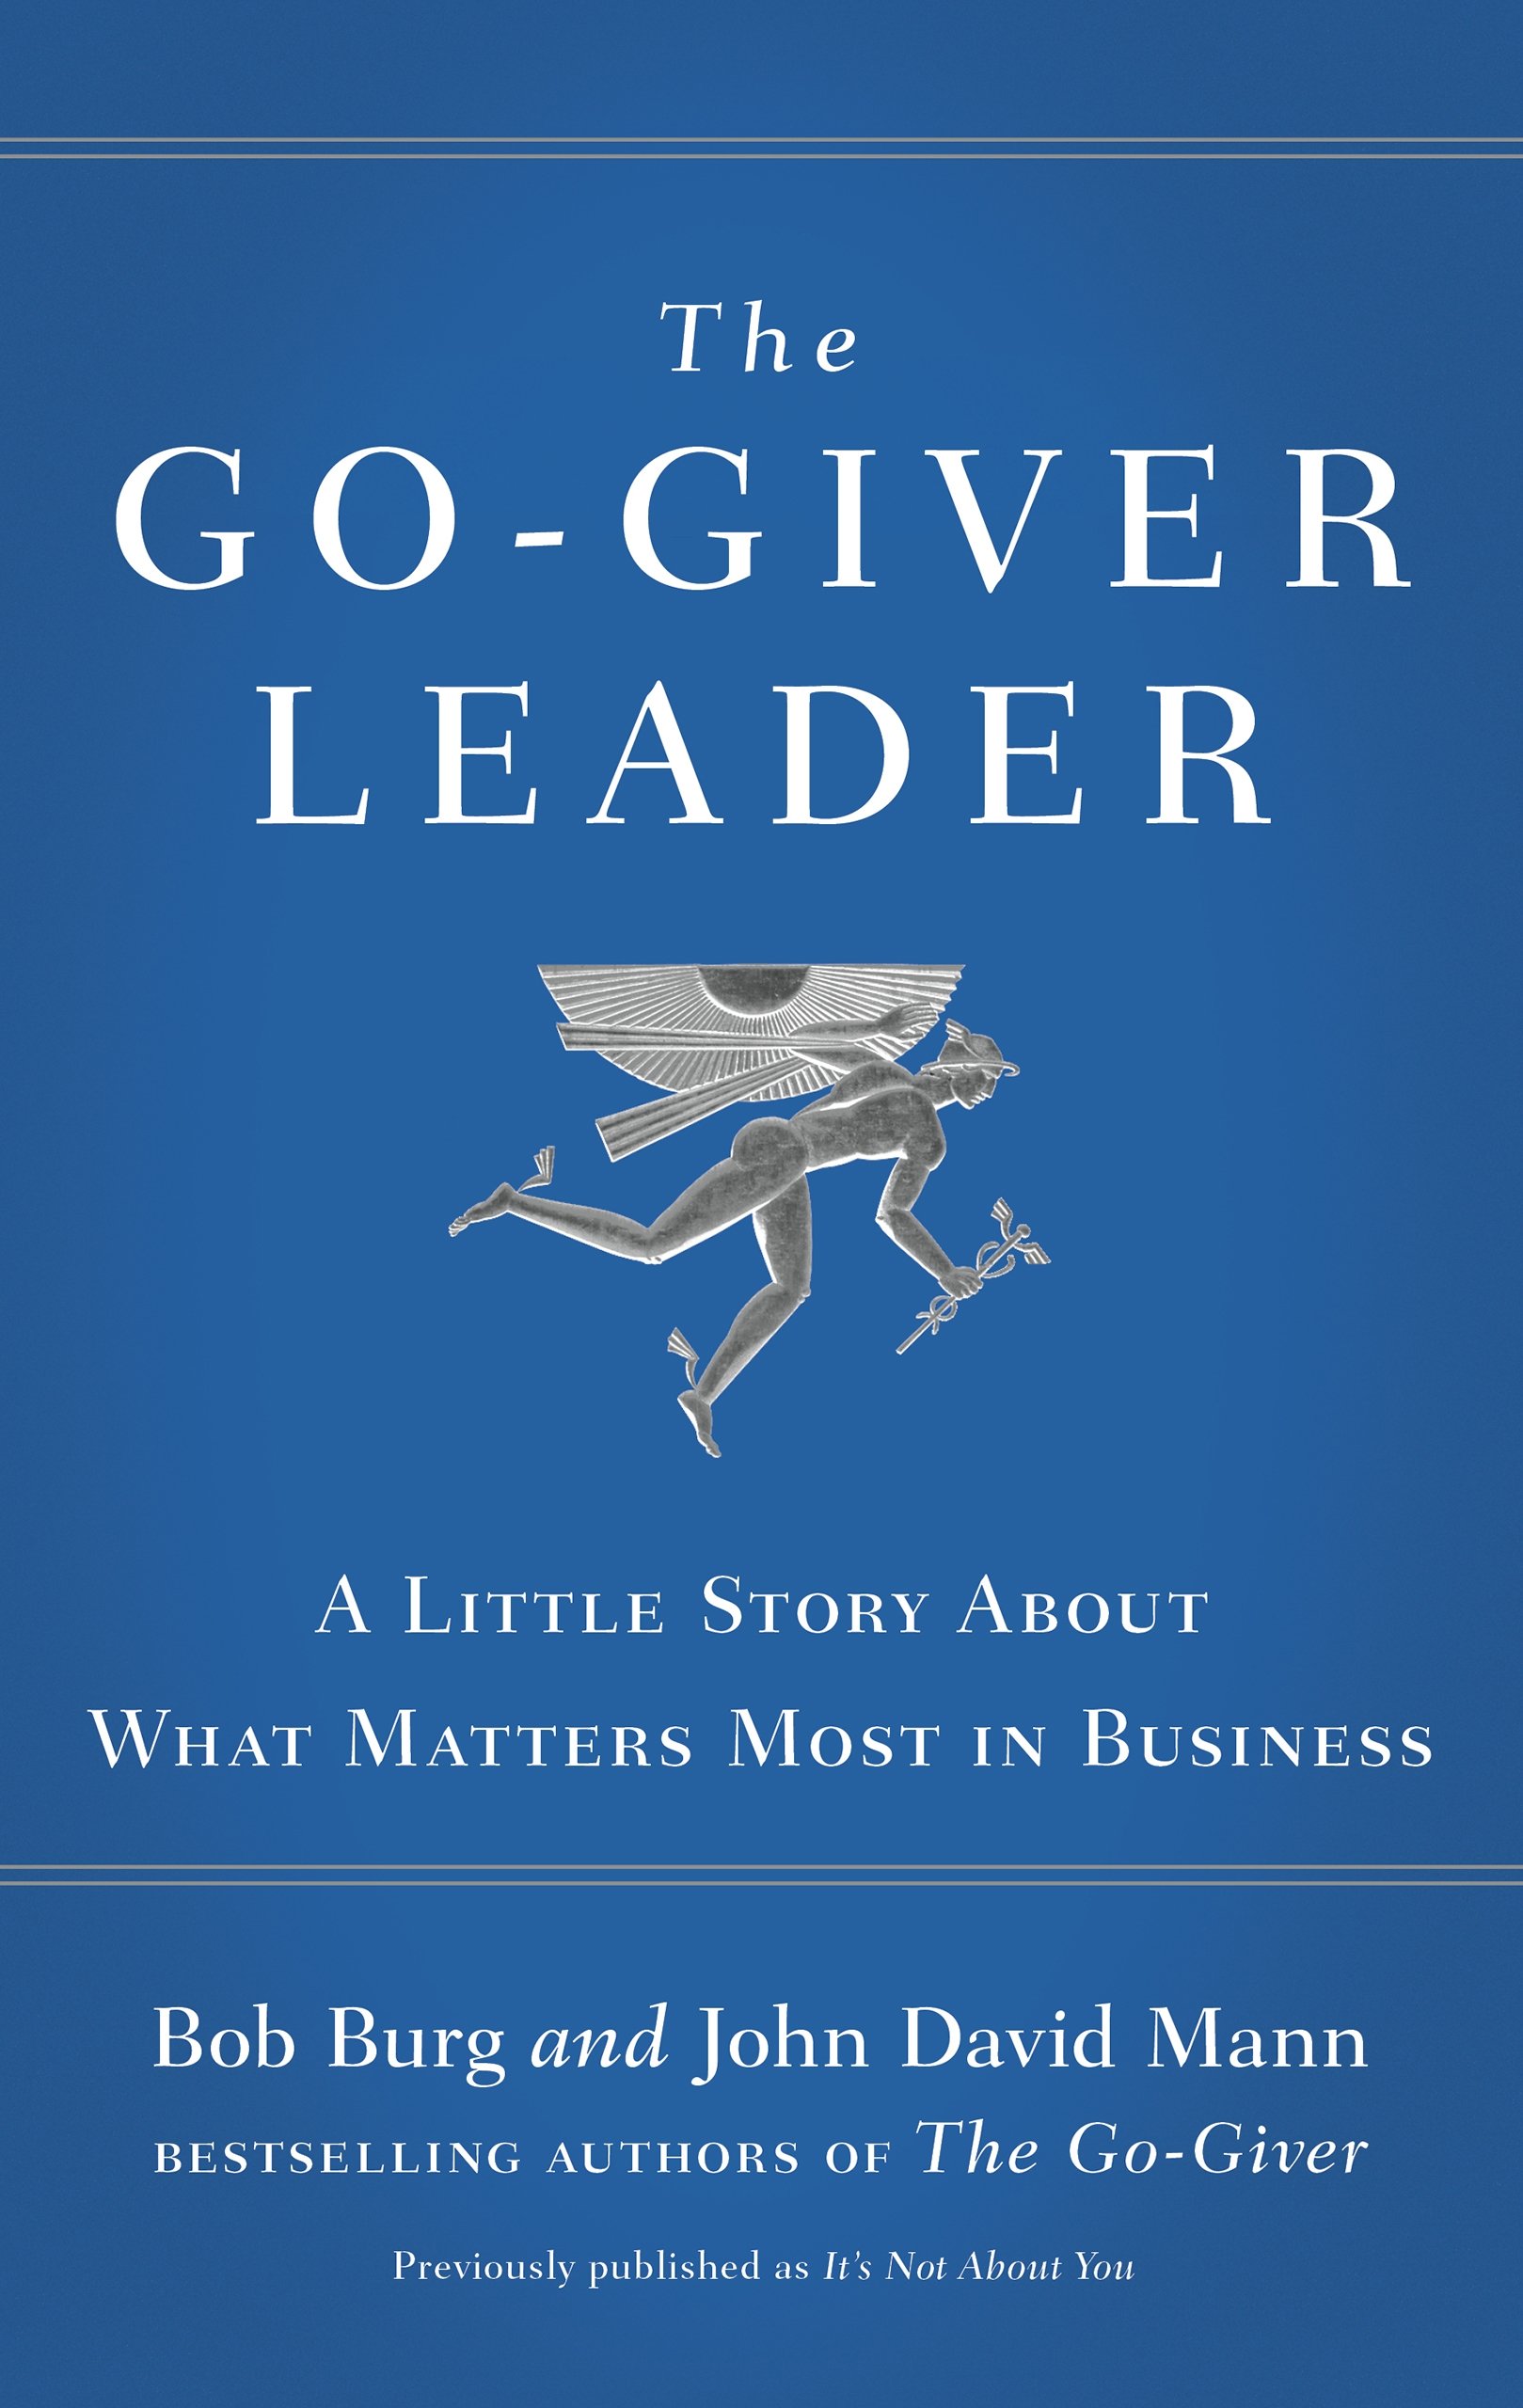 The Goal Giver” by Bob Burg